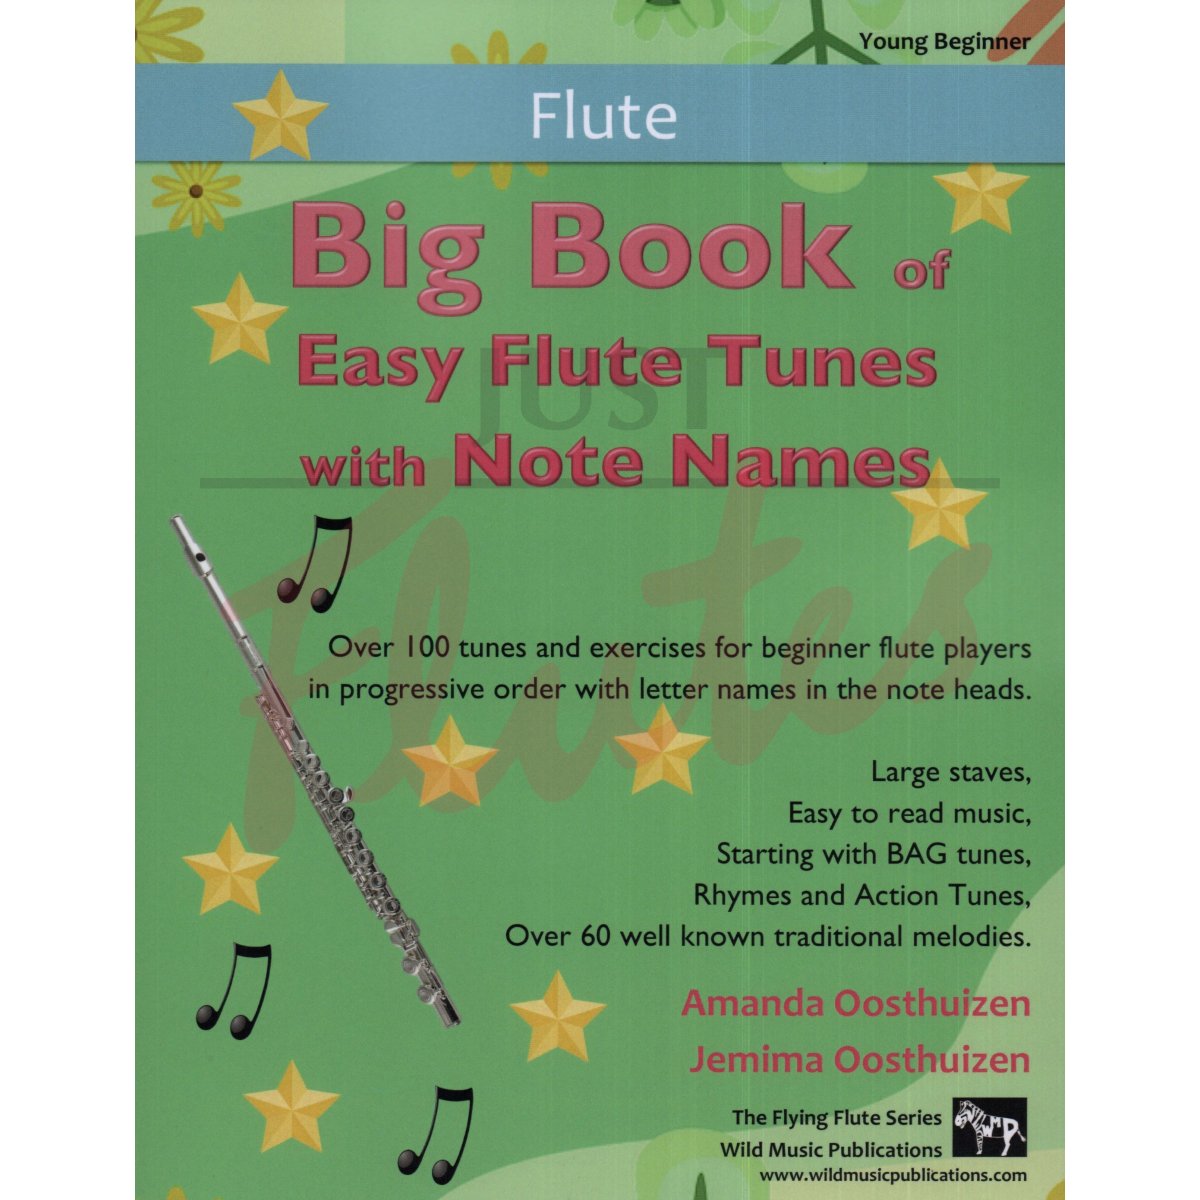 Big Book of Easy Flute Tunes with Note Names